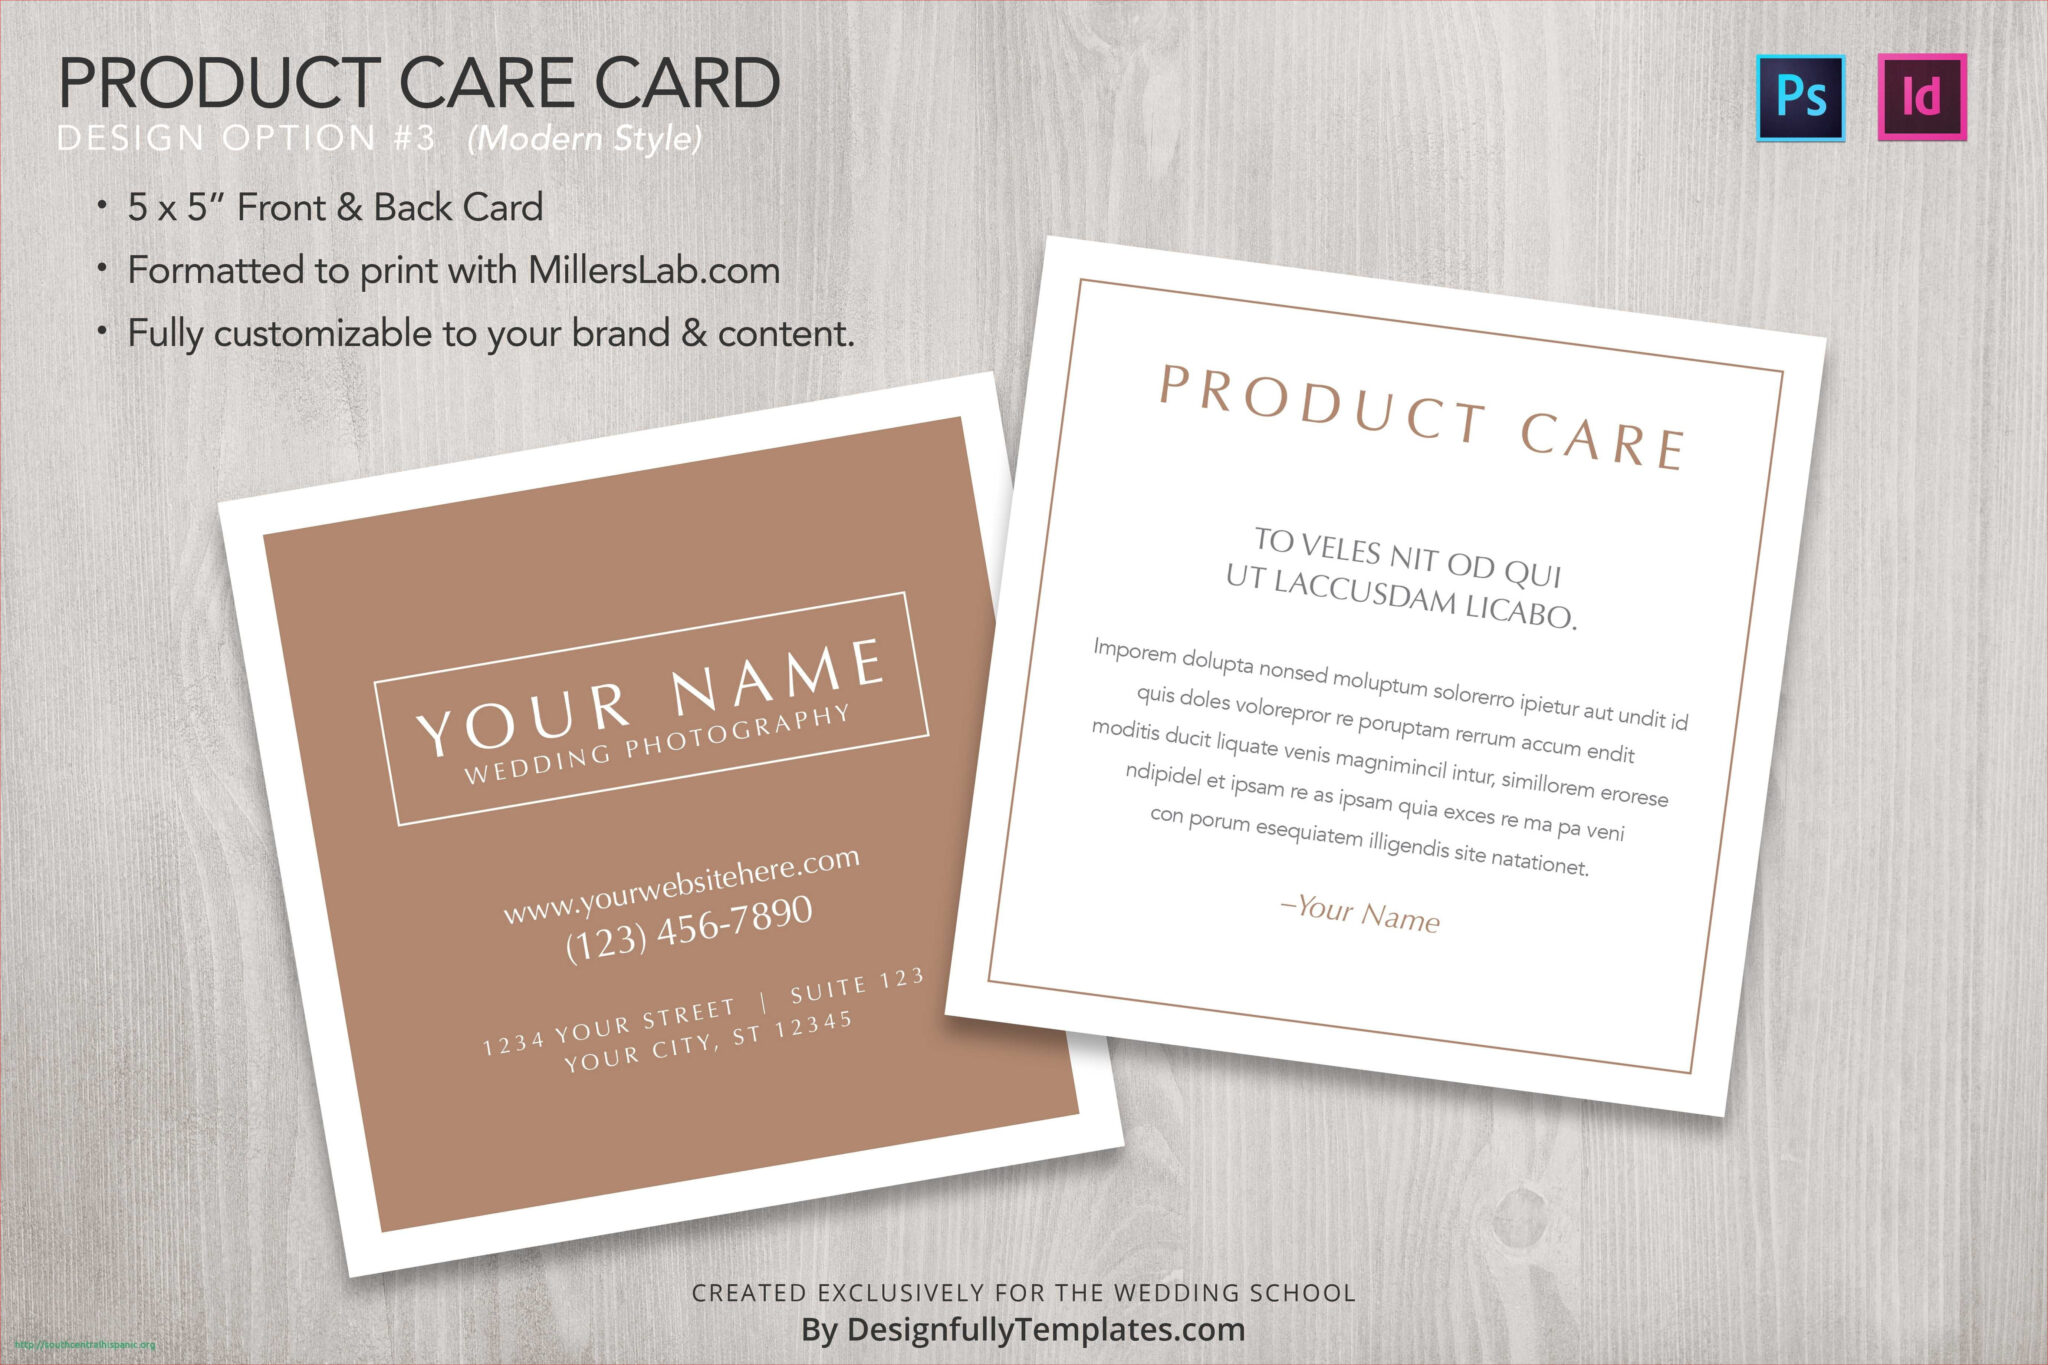 Esthetician Business Card Templates Apocalomegaproductions in Gartner